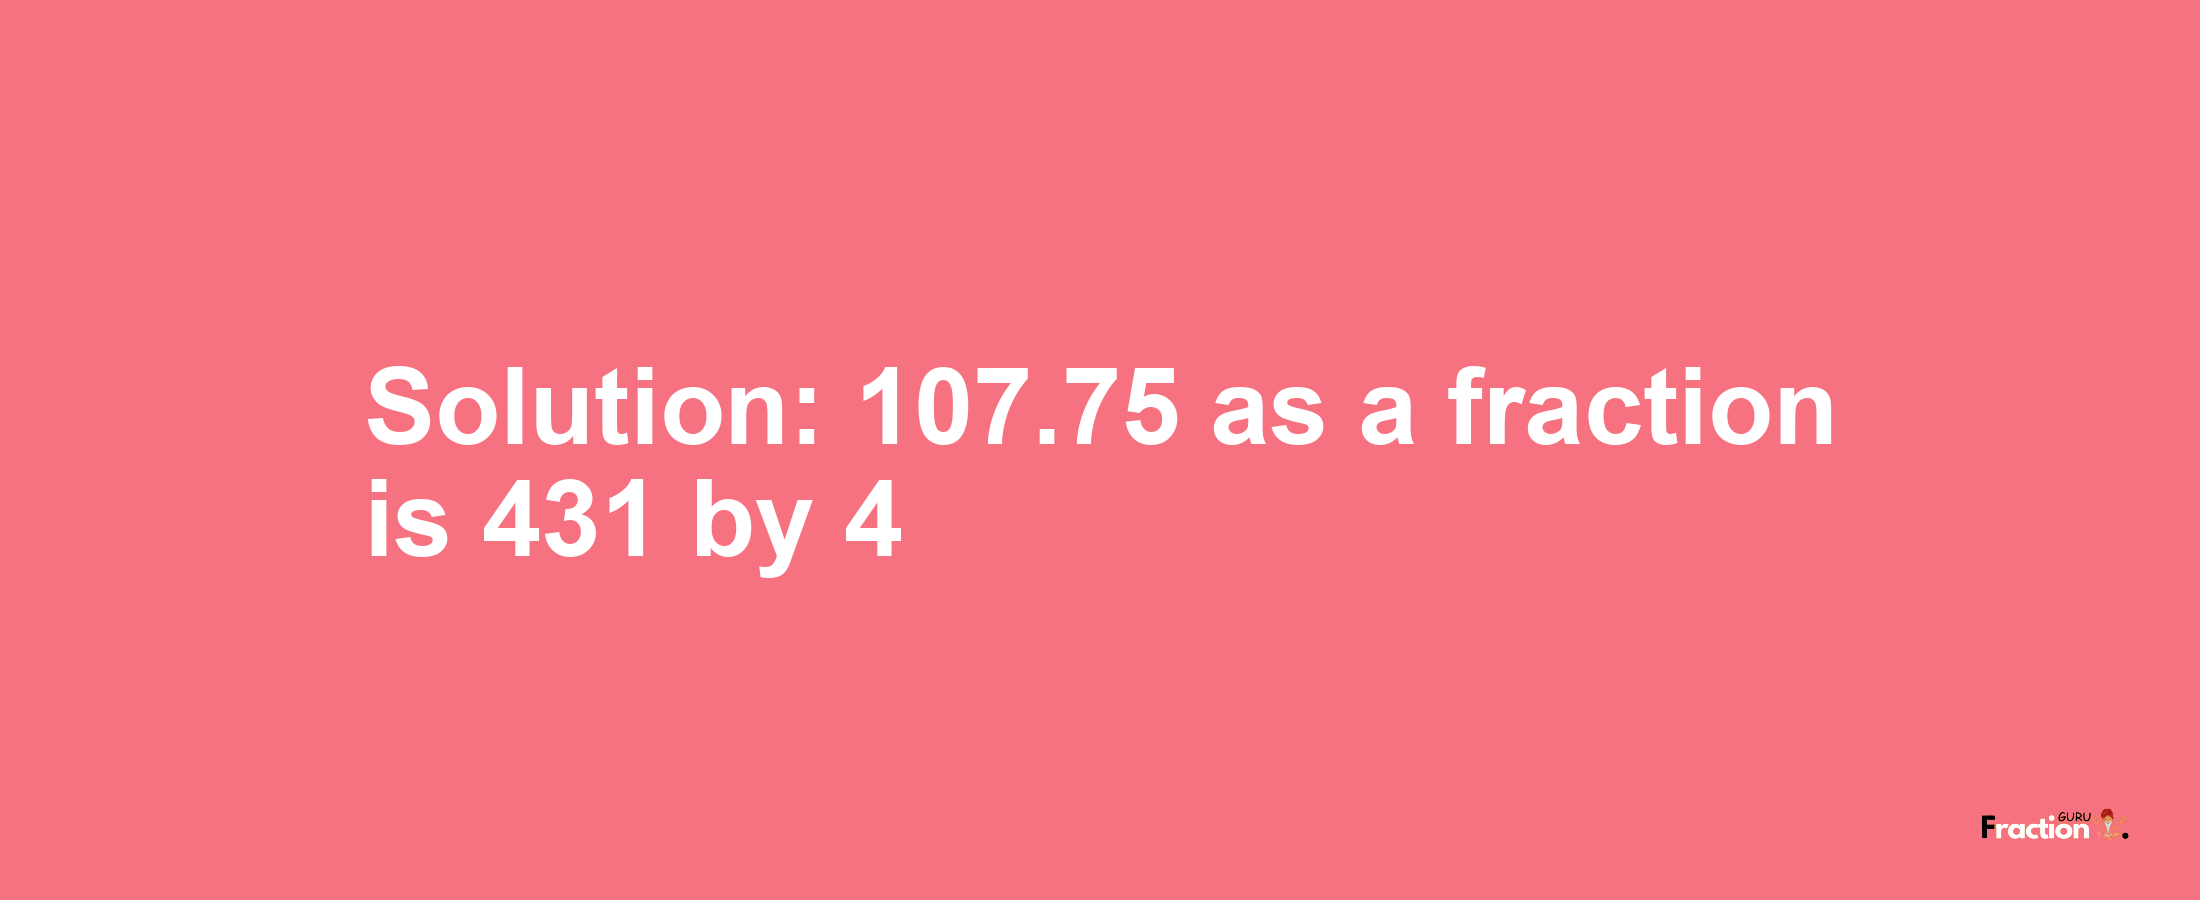 Solution:107.75 as a fraction is 431/4